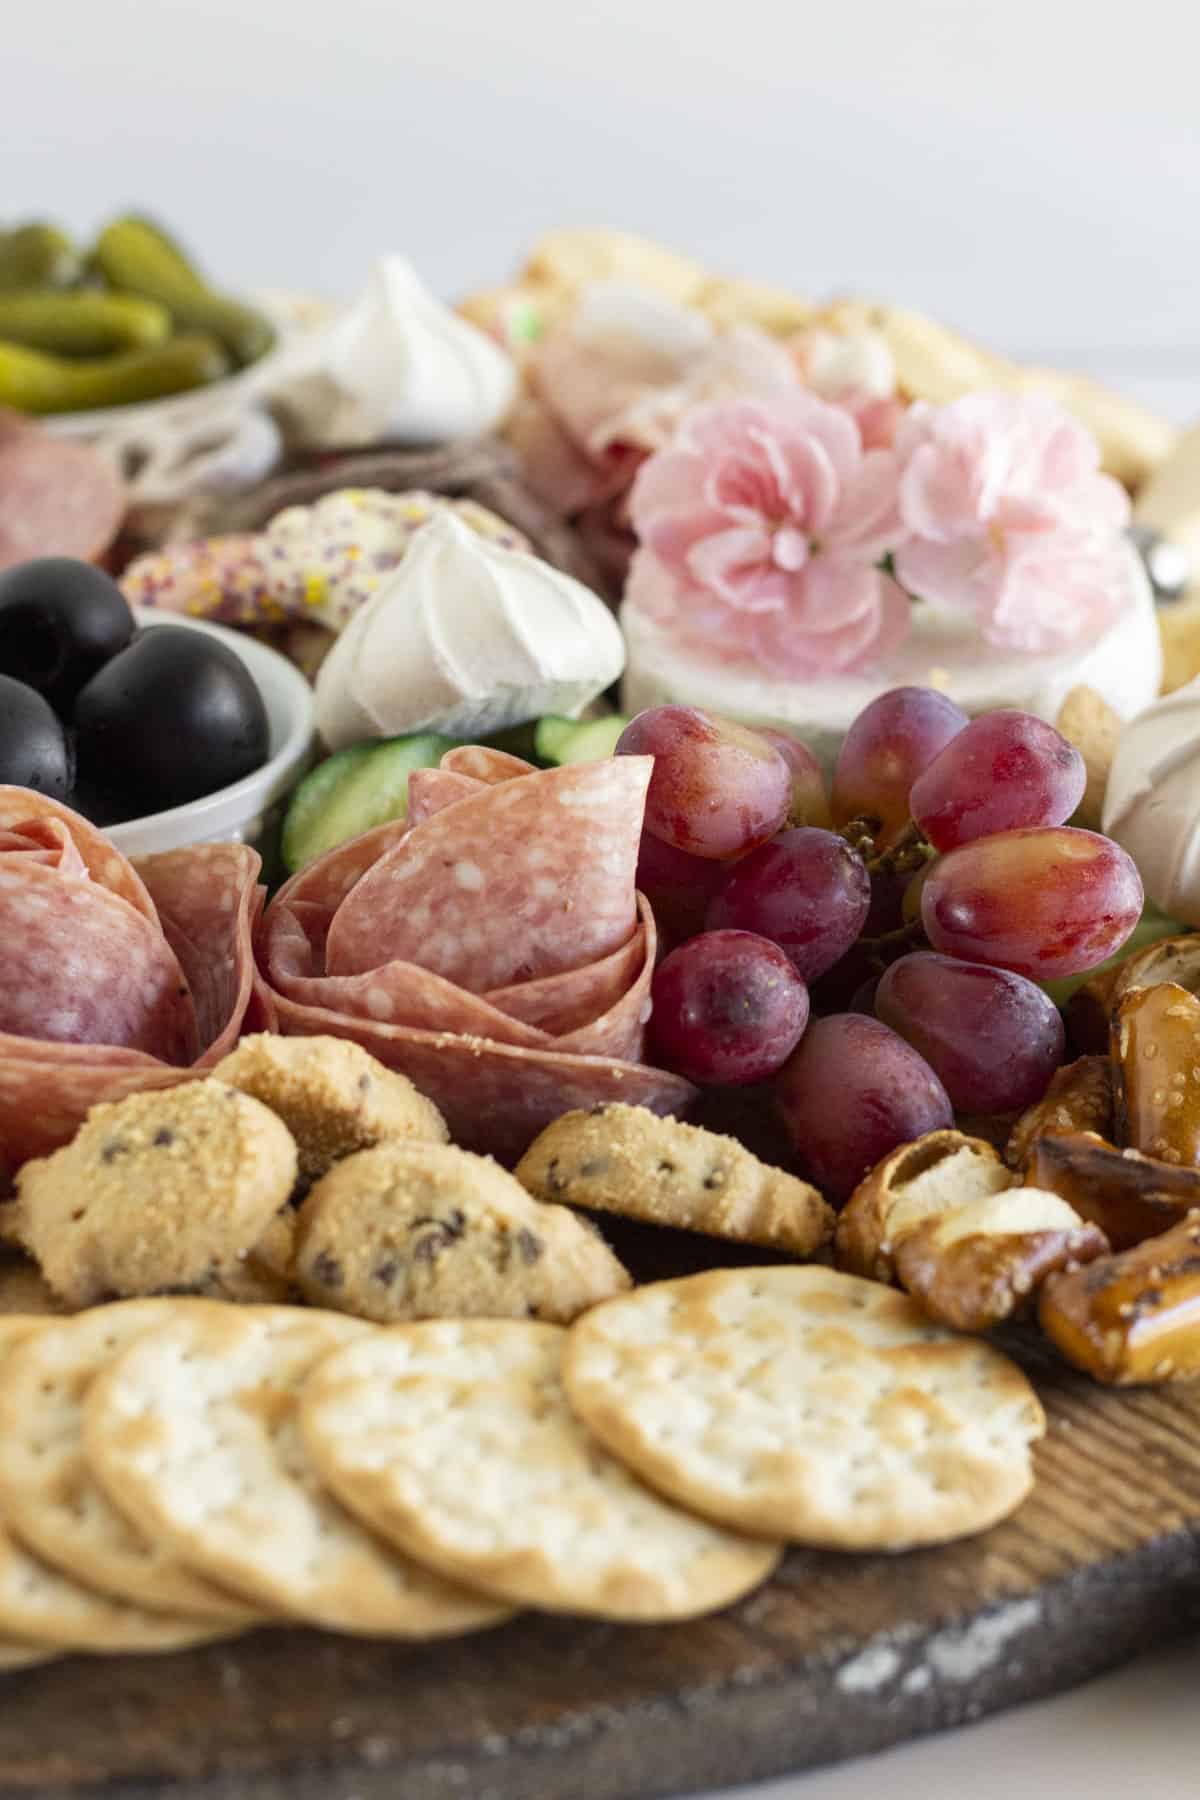 A summer charcuterie board with fresh fruit, cookies and crackers.